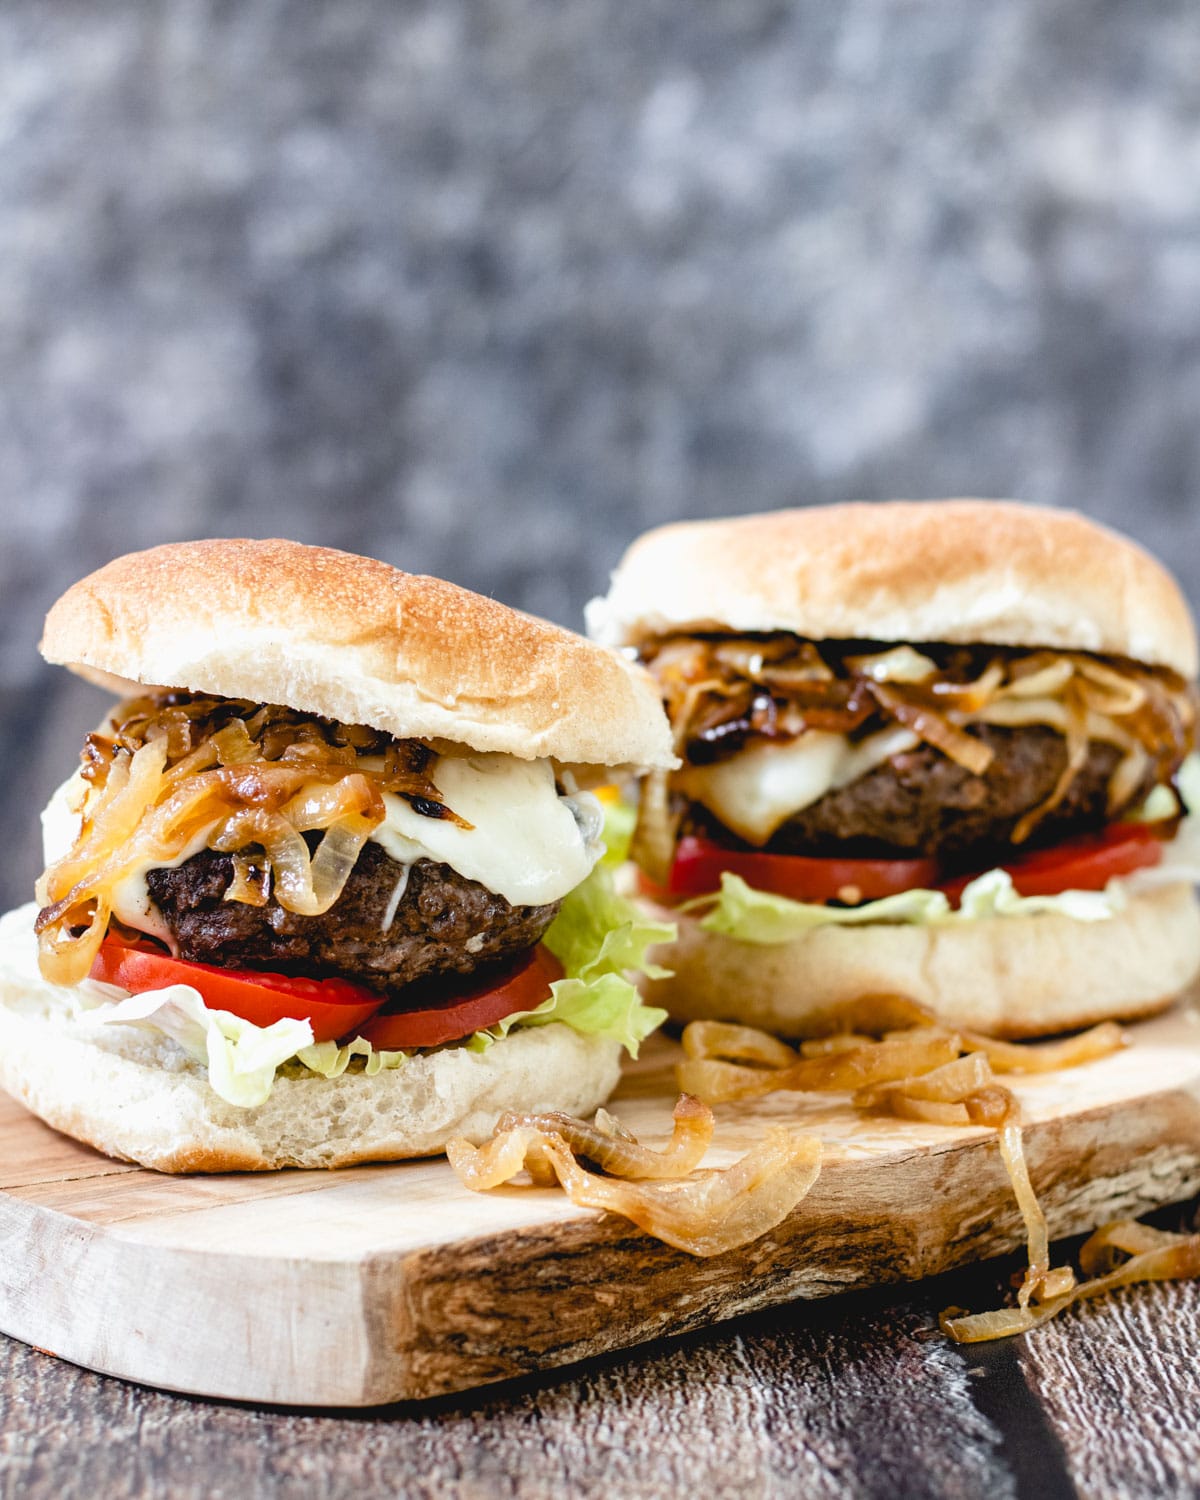 Two elk burgers topped with cheese, caramelized onions, tomato and lettuce, on a wooden board.